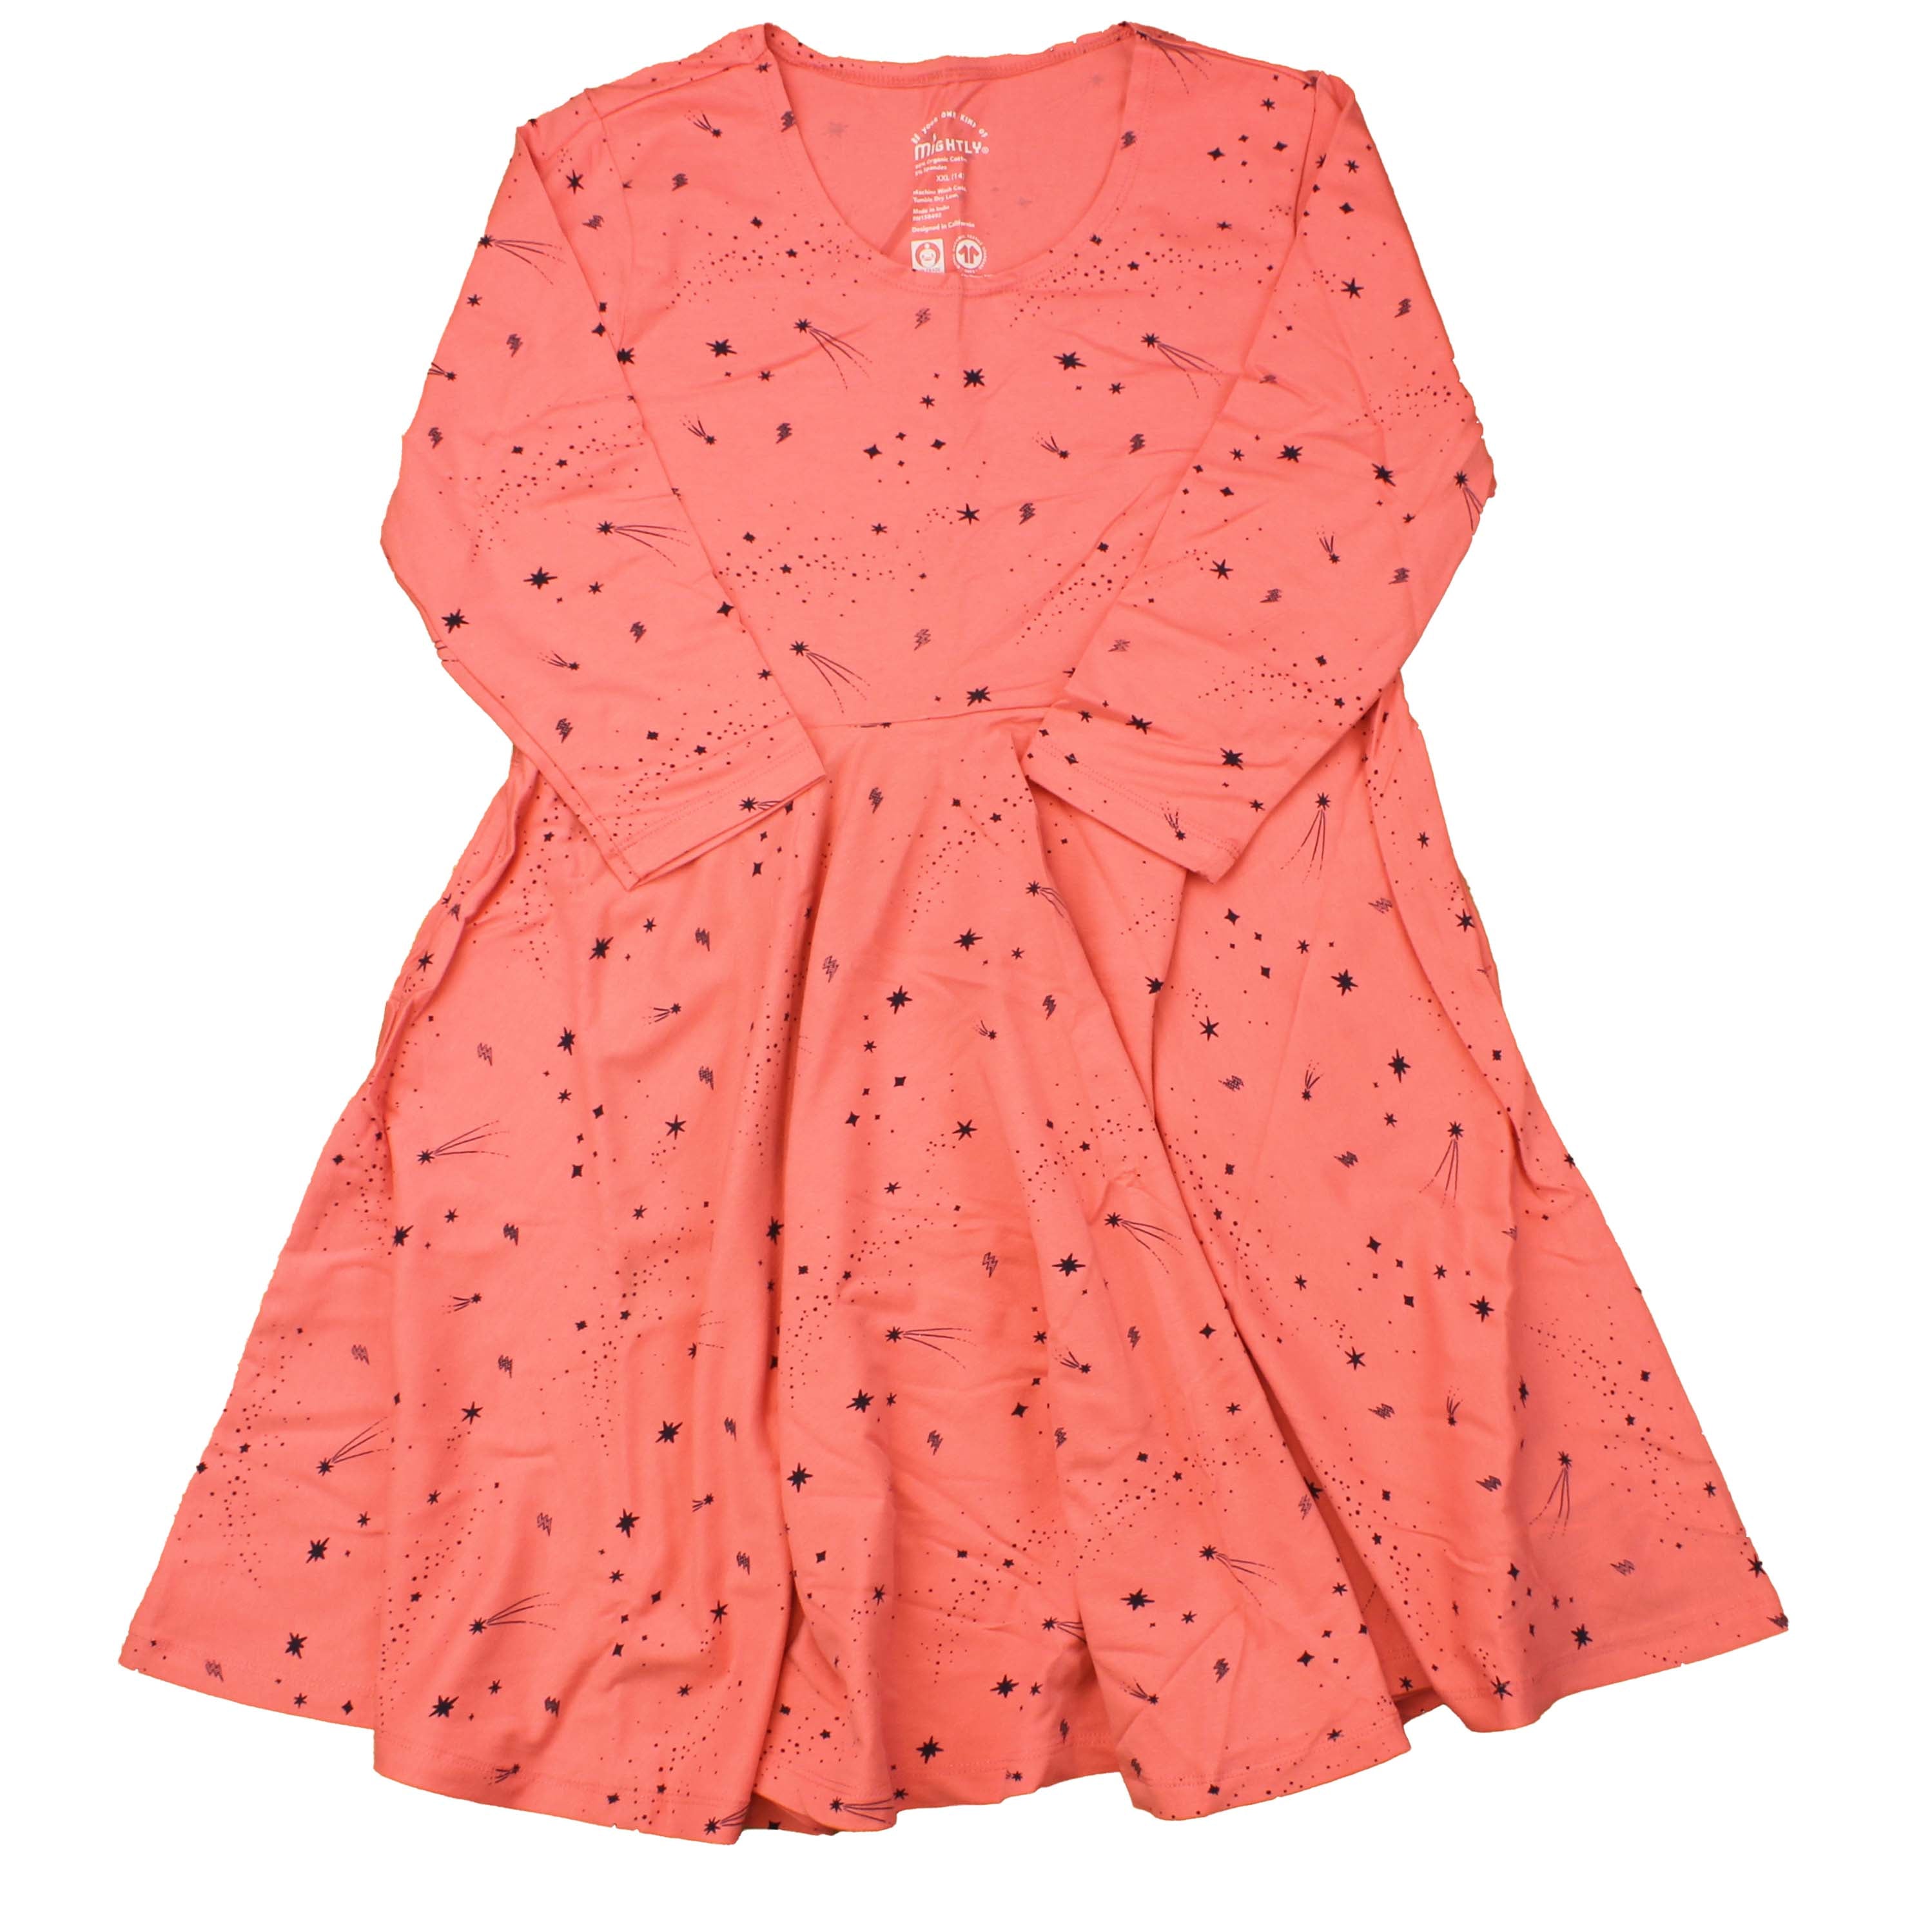 Pre-owned Coral | Black Stars Dress size: 2-5T